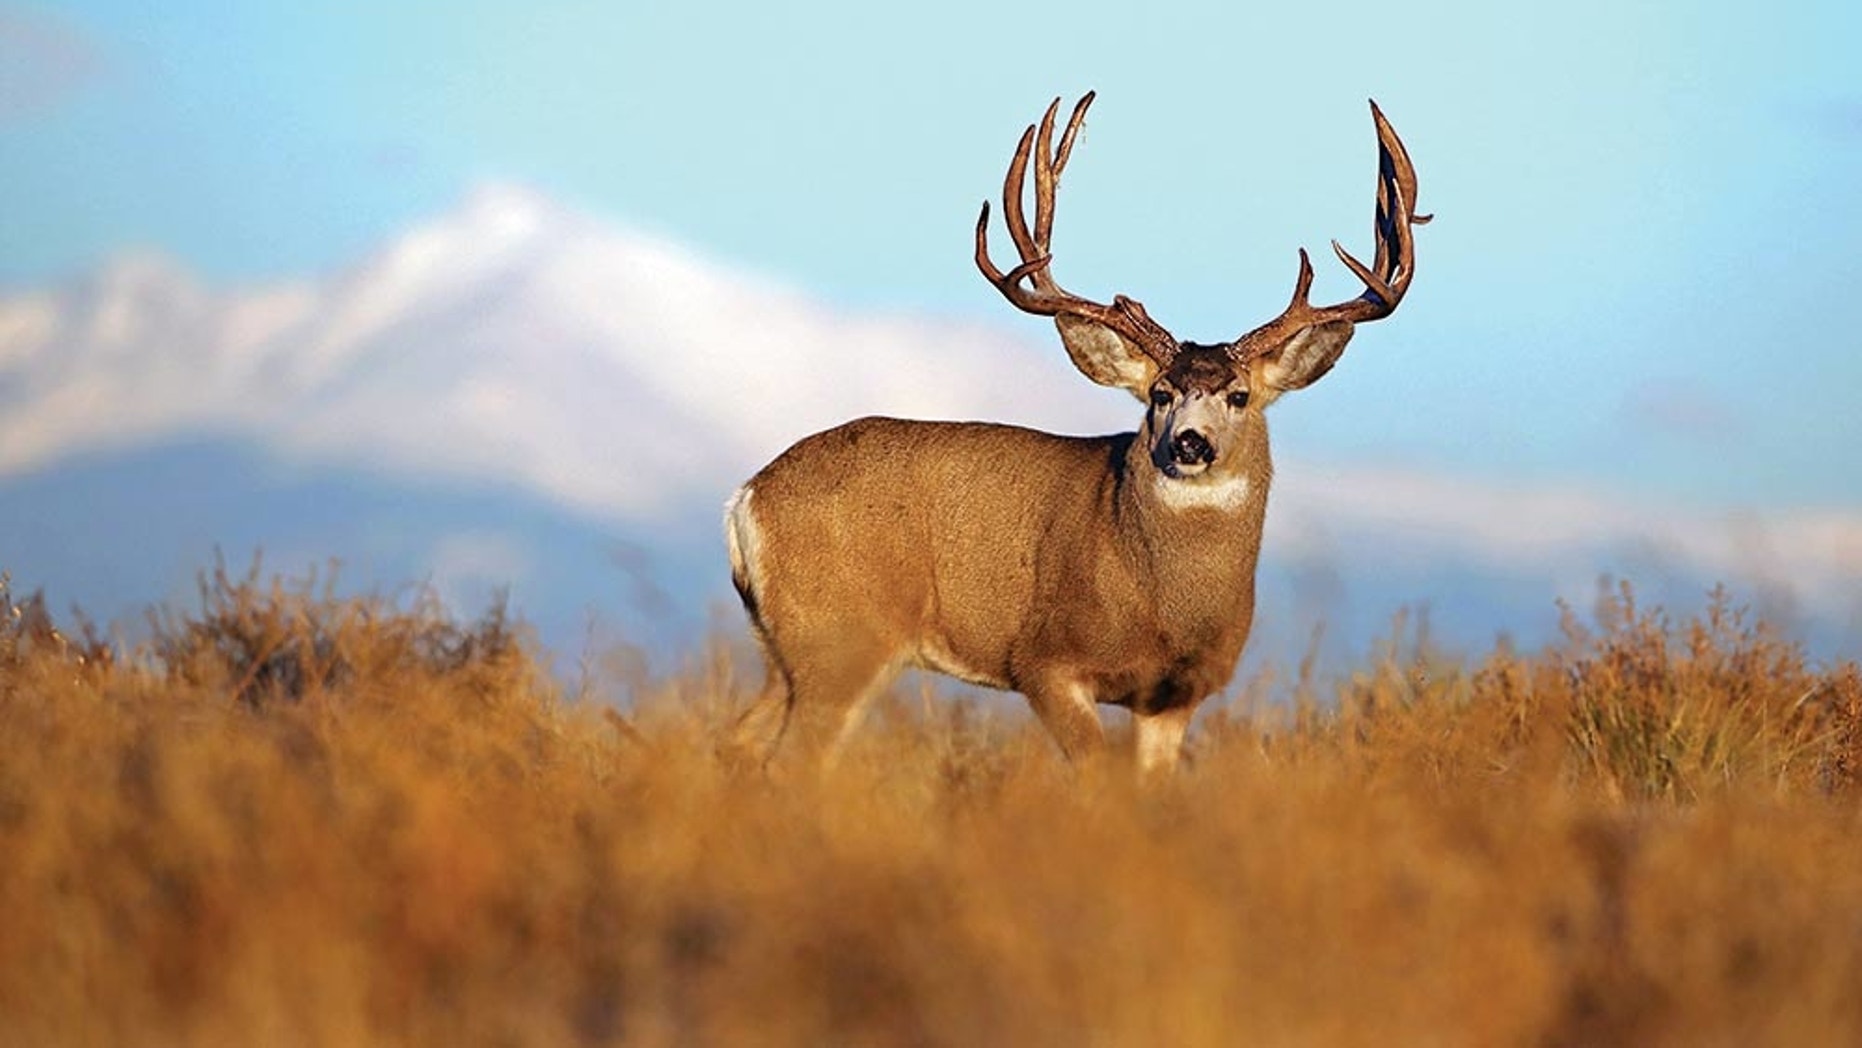 Oklahoma man faces charges for shooting deer hours before hunting